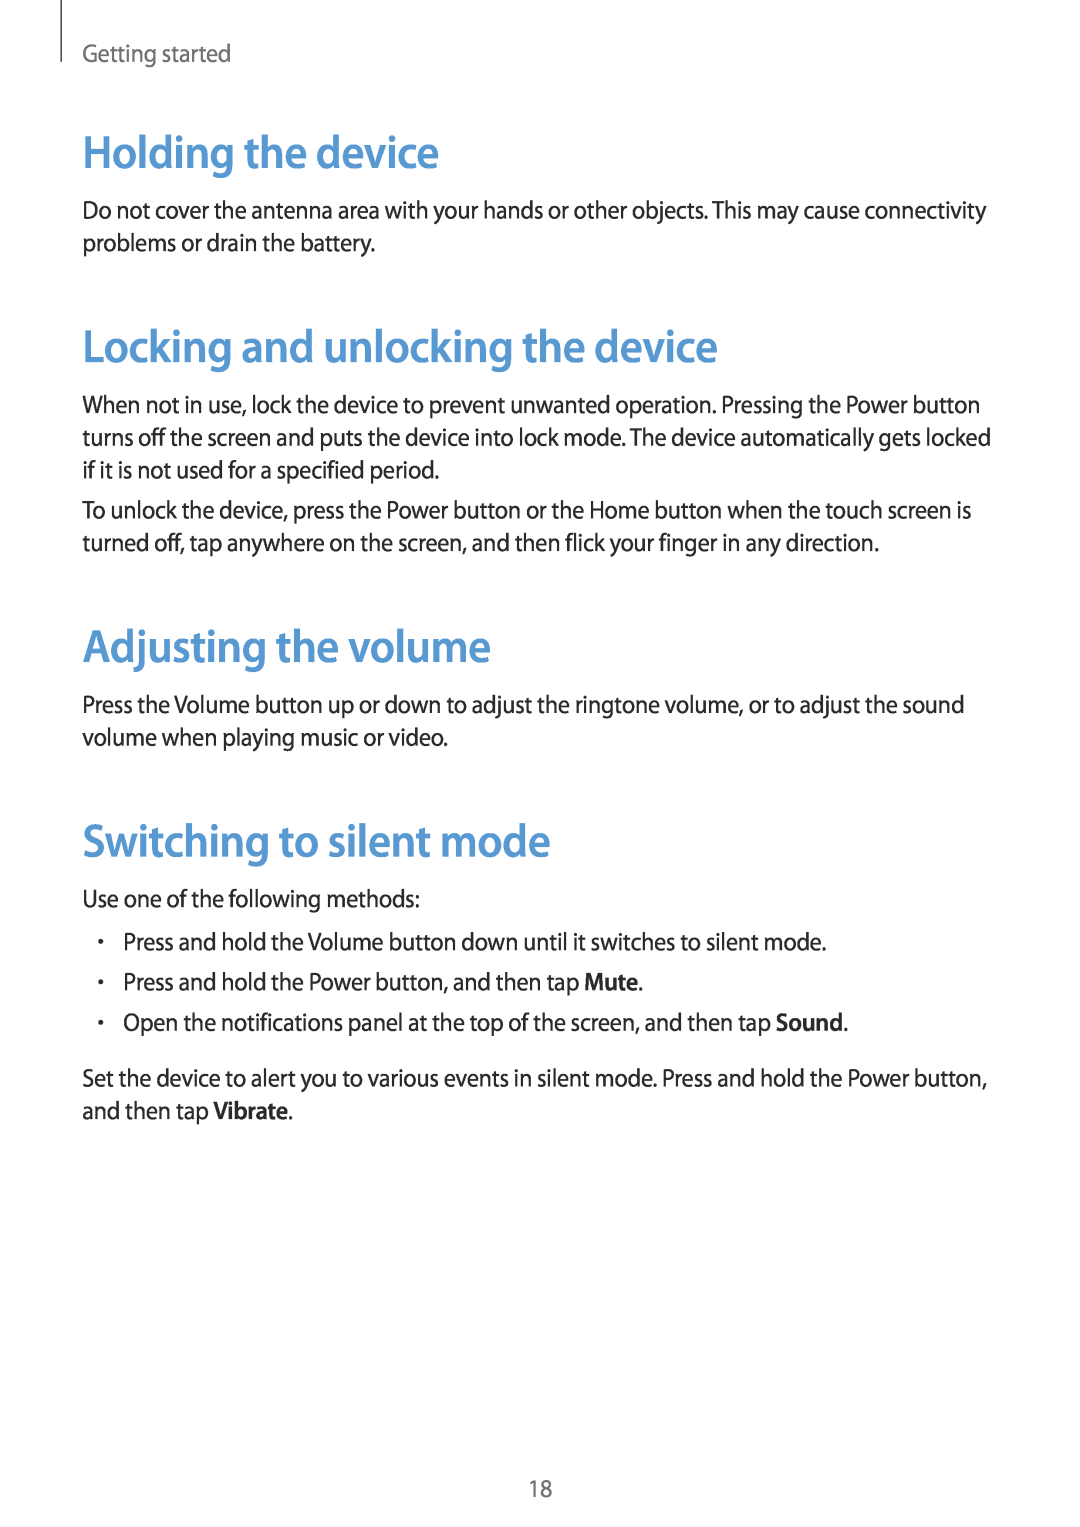 Samsung GT-S6810PWNOPT manual Holding the device, Locking and unlocking the device, Adjusting the volume, Getting started 